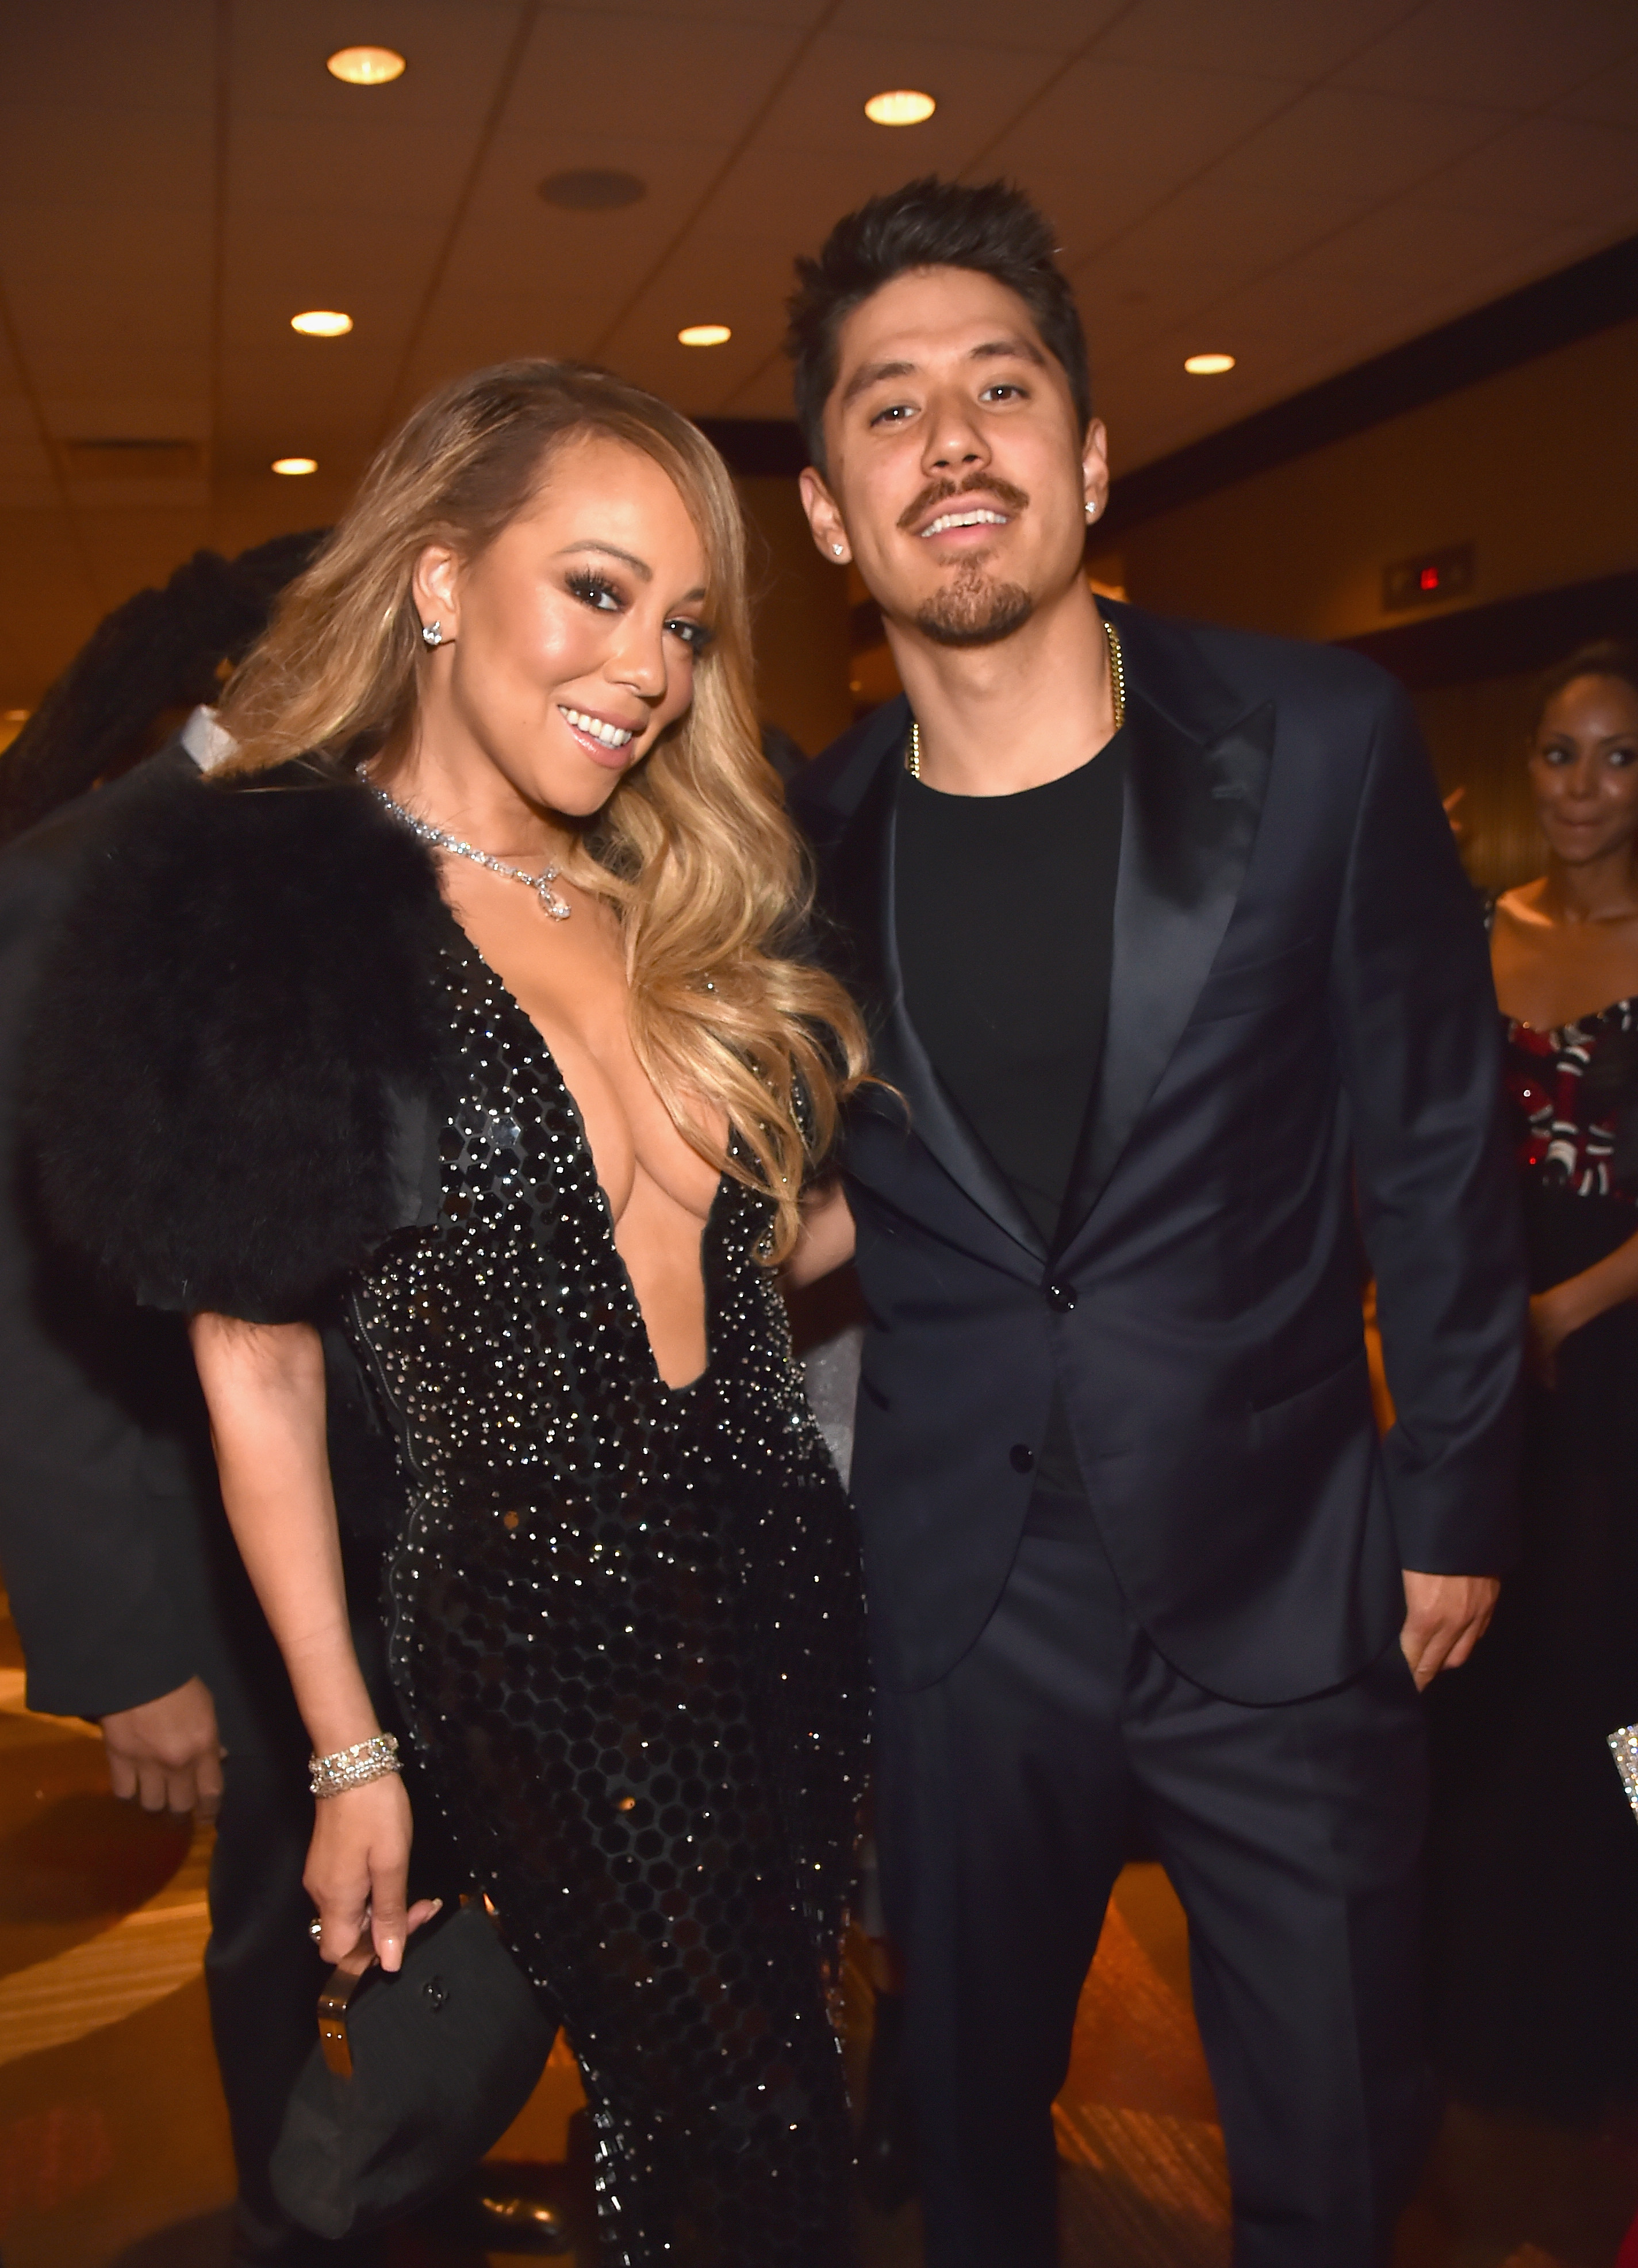 Mariah and Bryan smiling and standing together